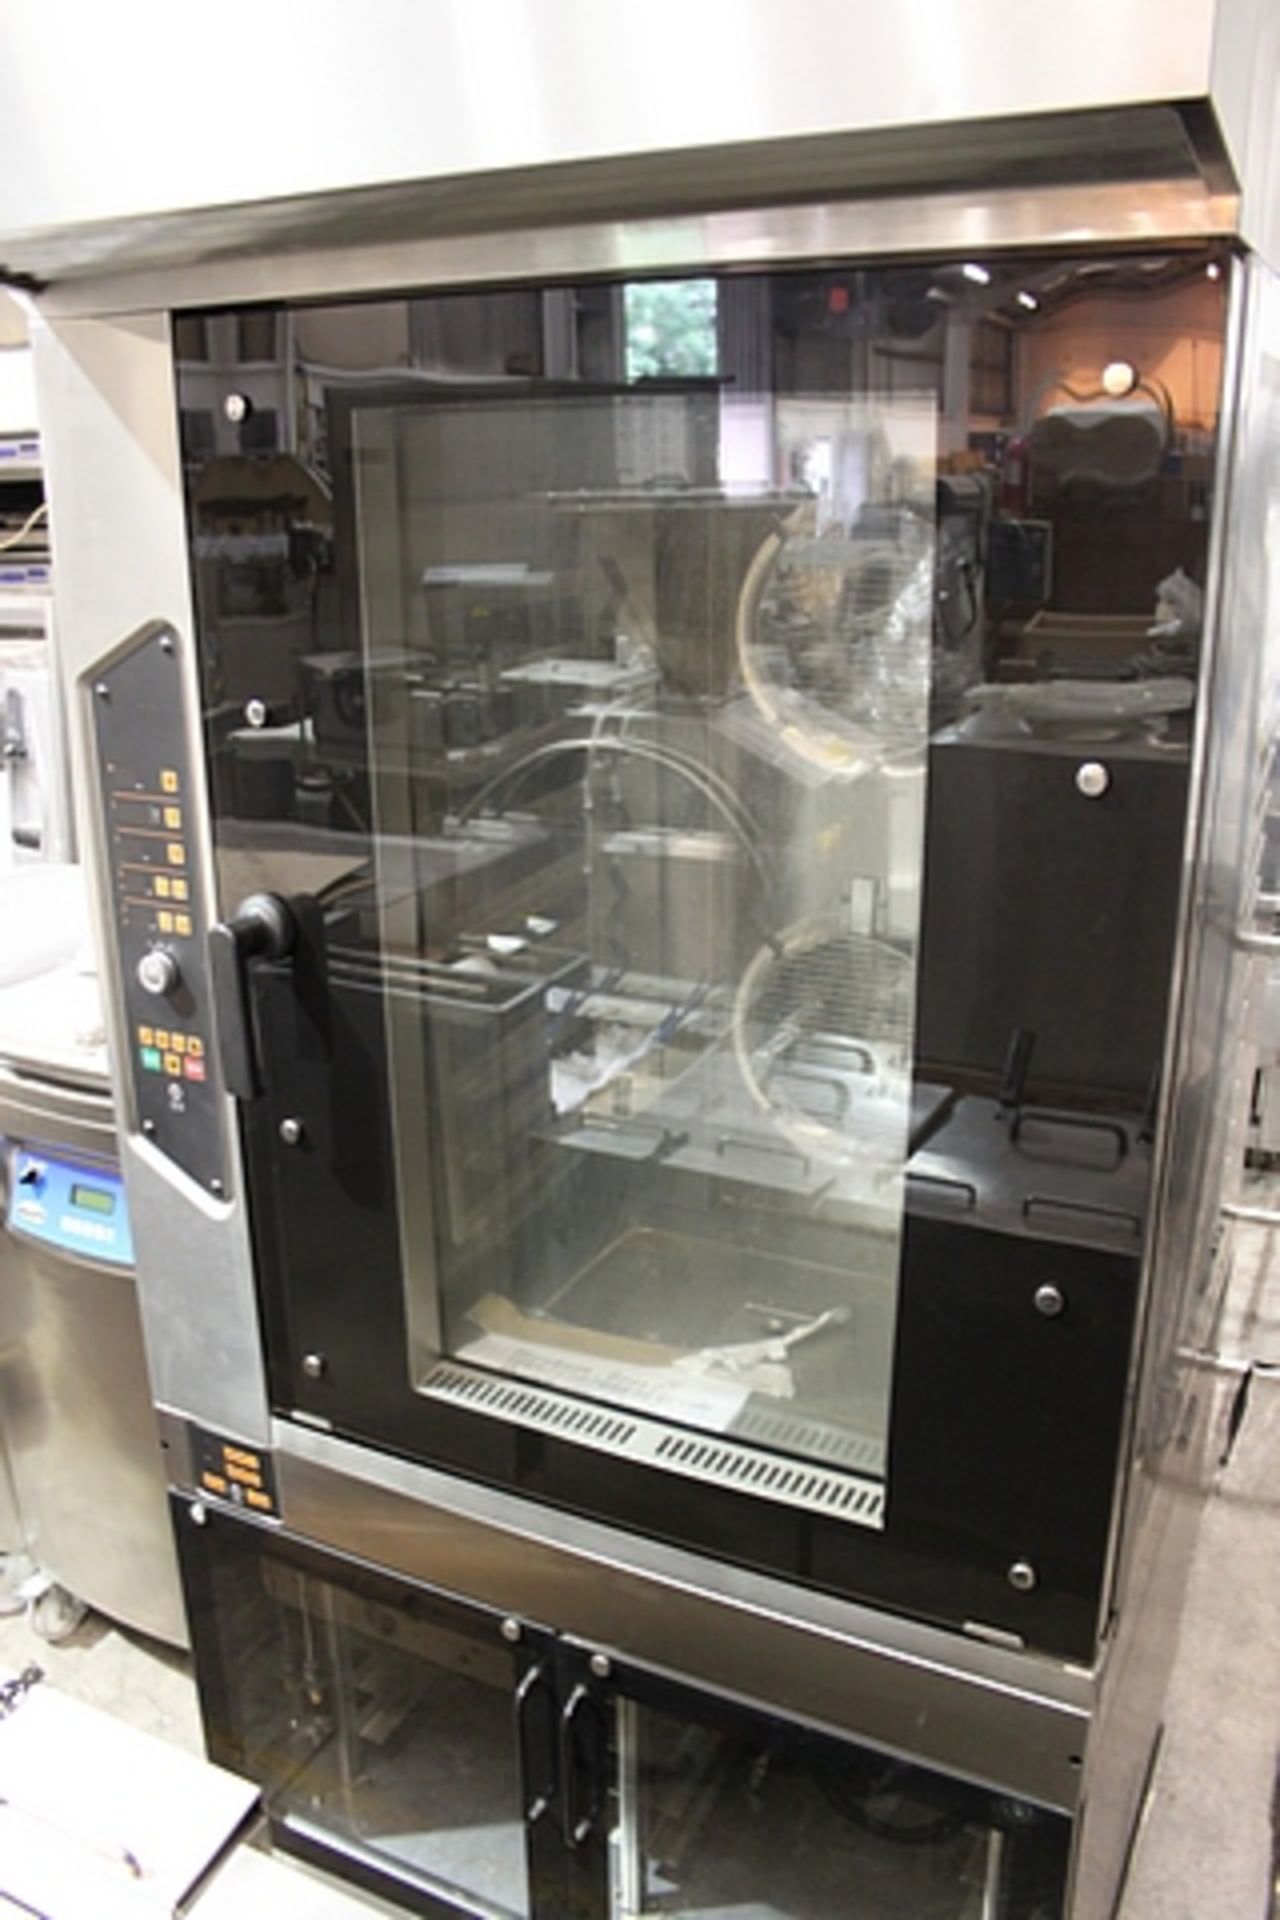 Kumkaya 10 grid convection oven with 12 tray 400mm x 600mm trays with fermentation chamber under